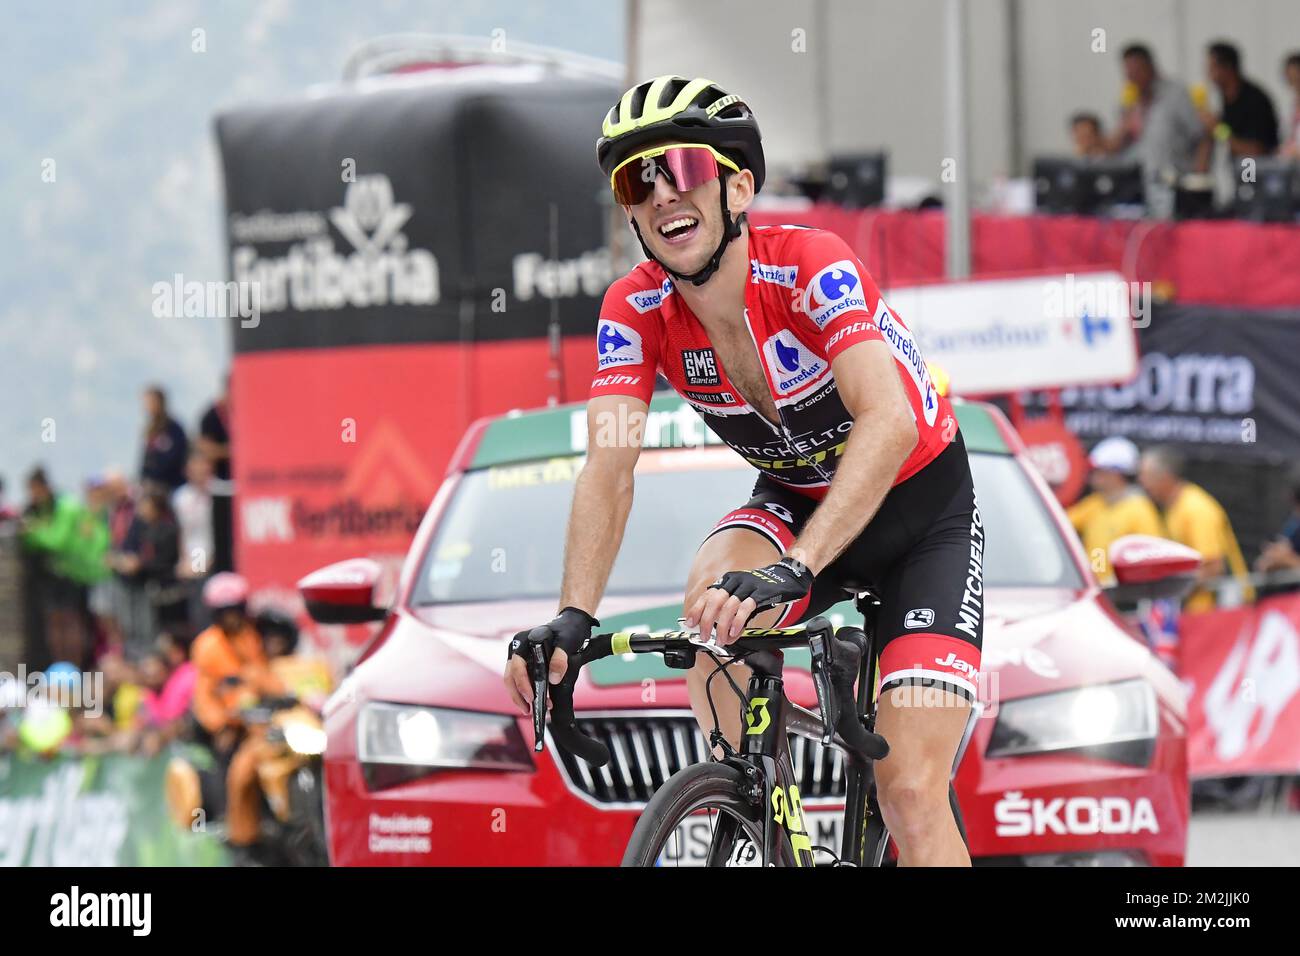 Britain's Simon Yates of Mitchelton - Scott pictured at the 20th stage of the 'Vuelta a Espana', Tour of Spain cycling race, 97,3km from Escaldes-Engordany to Sant-Julia de Loria, Spain, Saturday 15 September 2018. BELGA PHOTO YUZURU SUNADA FRANCE OUT Stock Photo